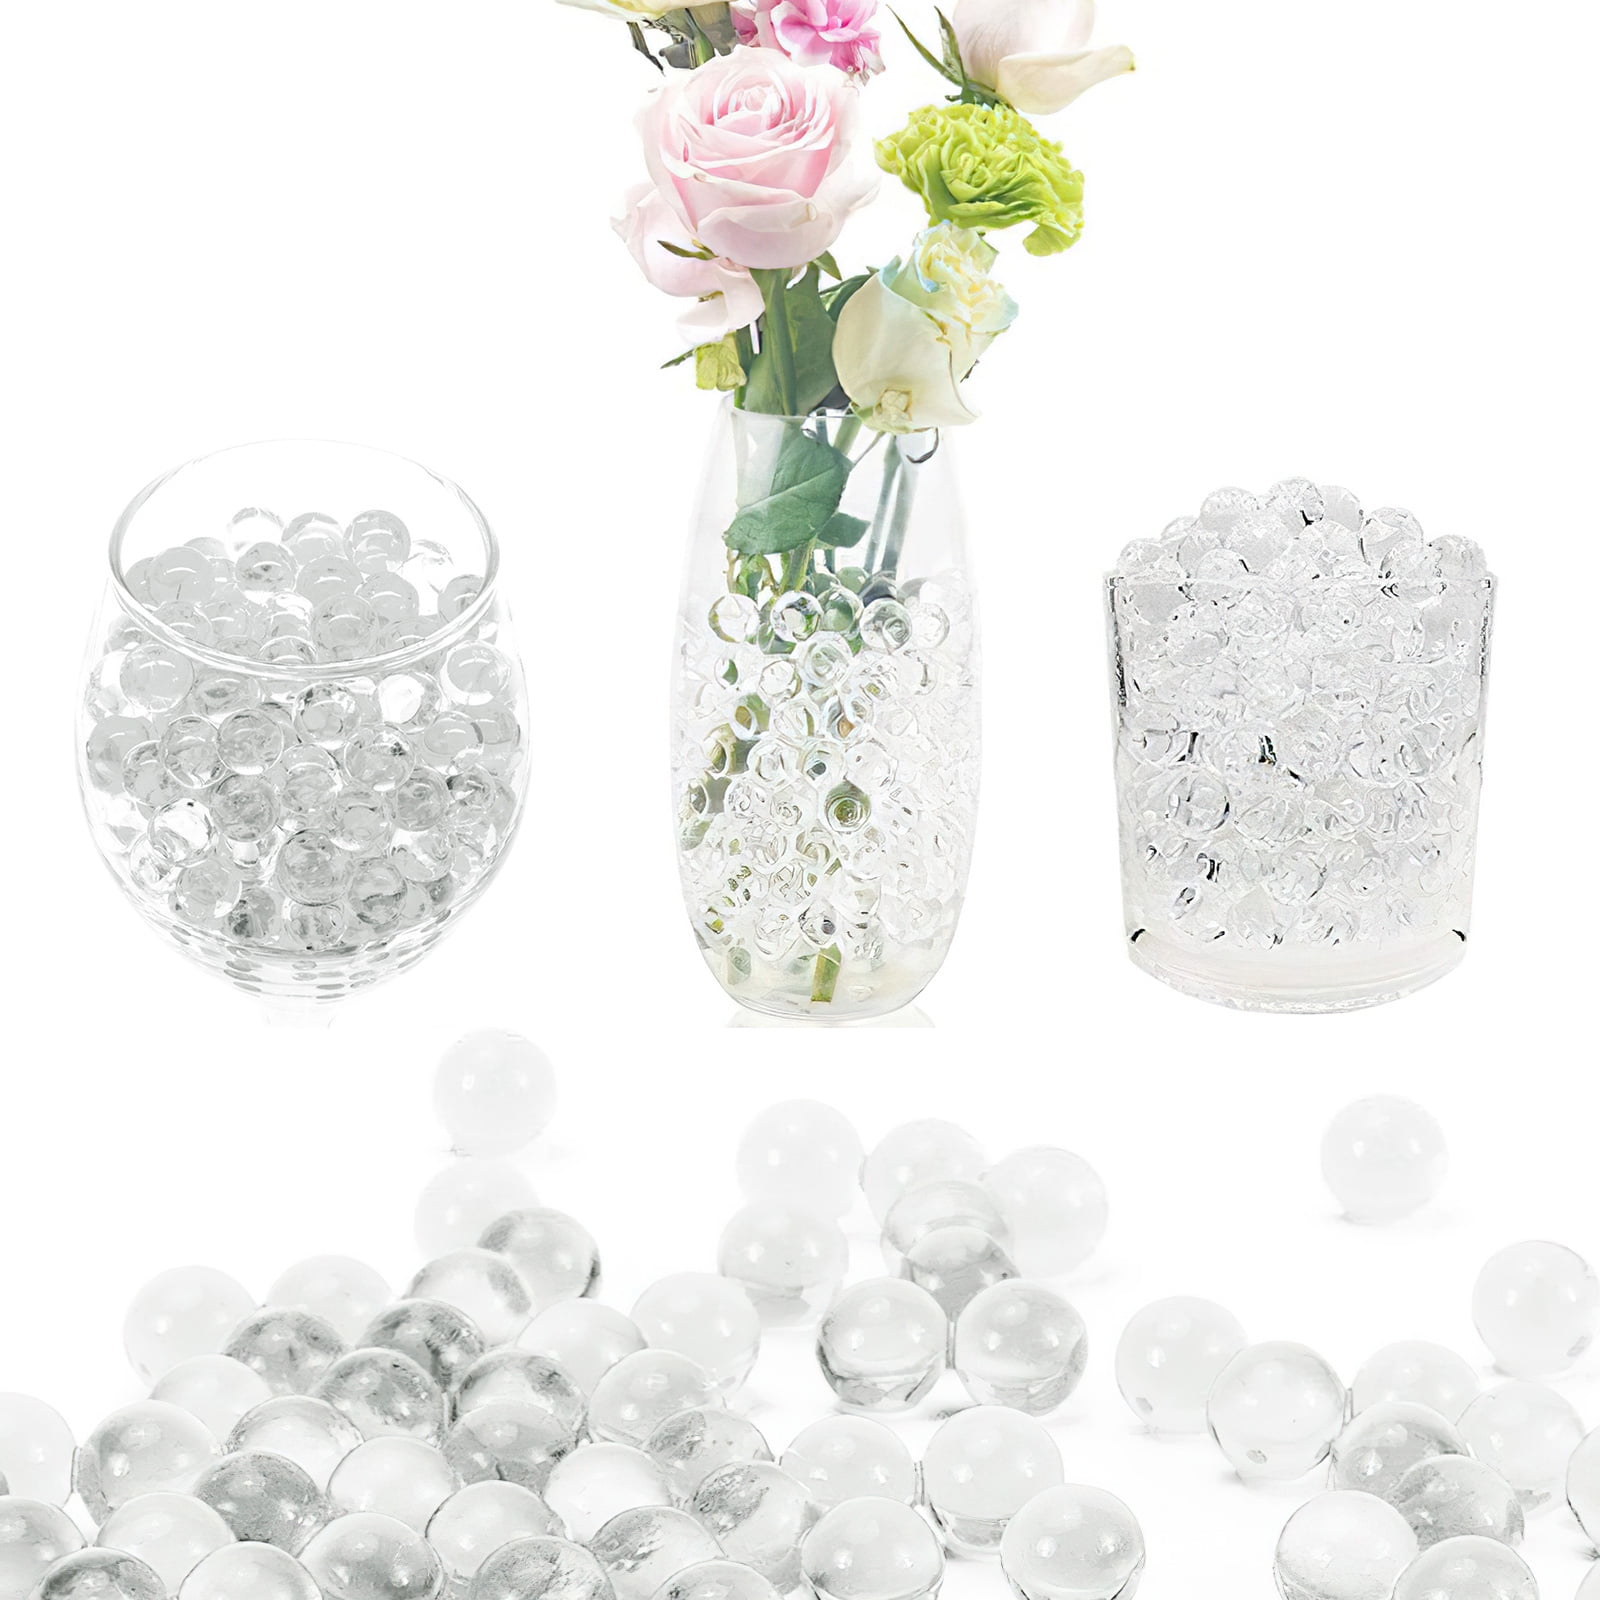 50000Pcs Clear Water Beads Clear Water Gel Jelly Balls Vase Filler  Beads,Vase Fillers for Floating Pearls, Floating Candle Making, Wedding  Centerpiece, Floral Arrangement (Transparent) 